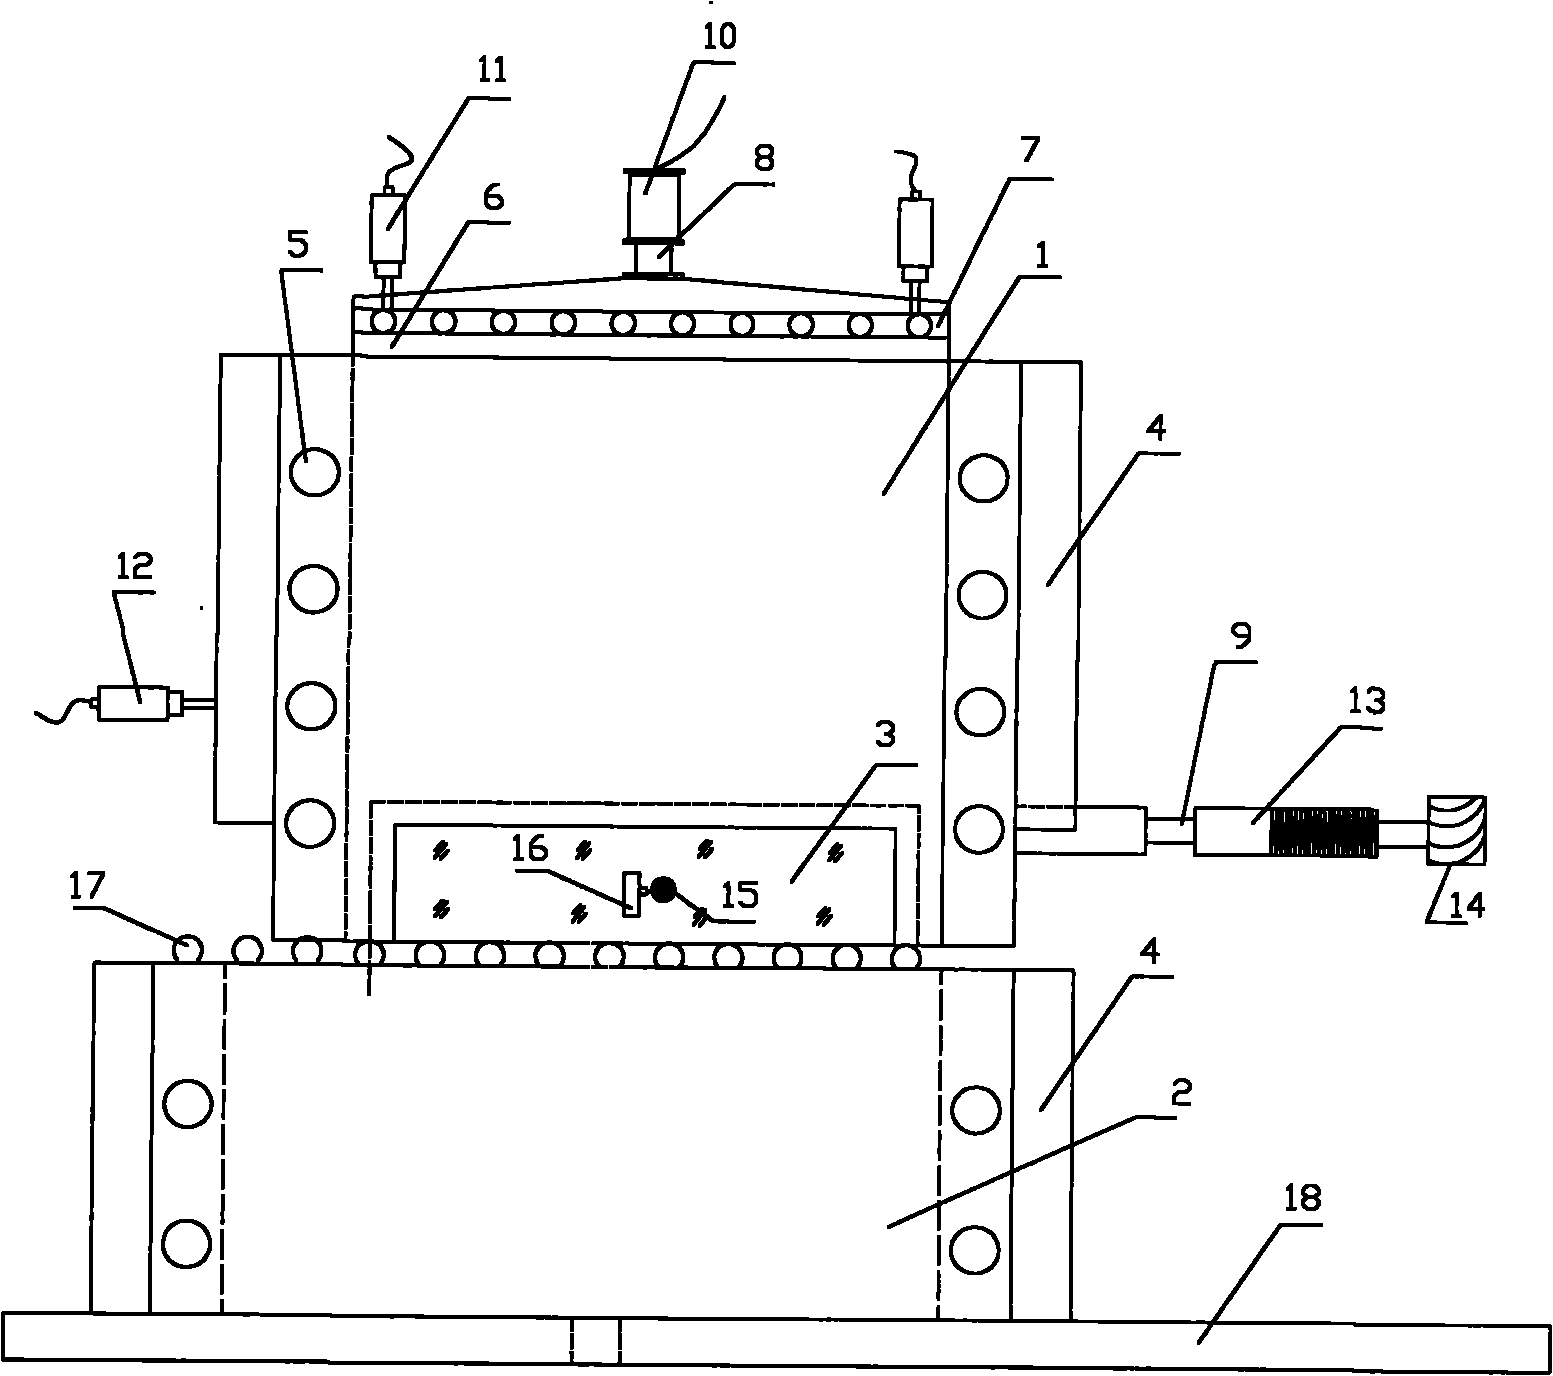 Earth-structure interaction contact surface shearing test visualization device